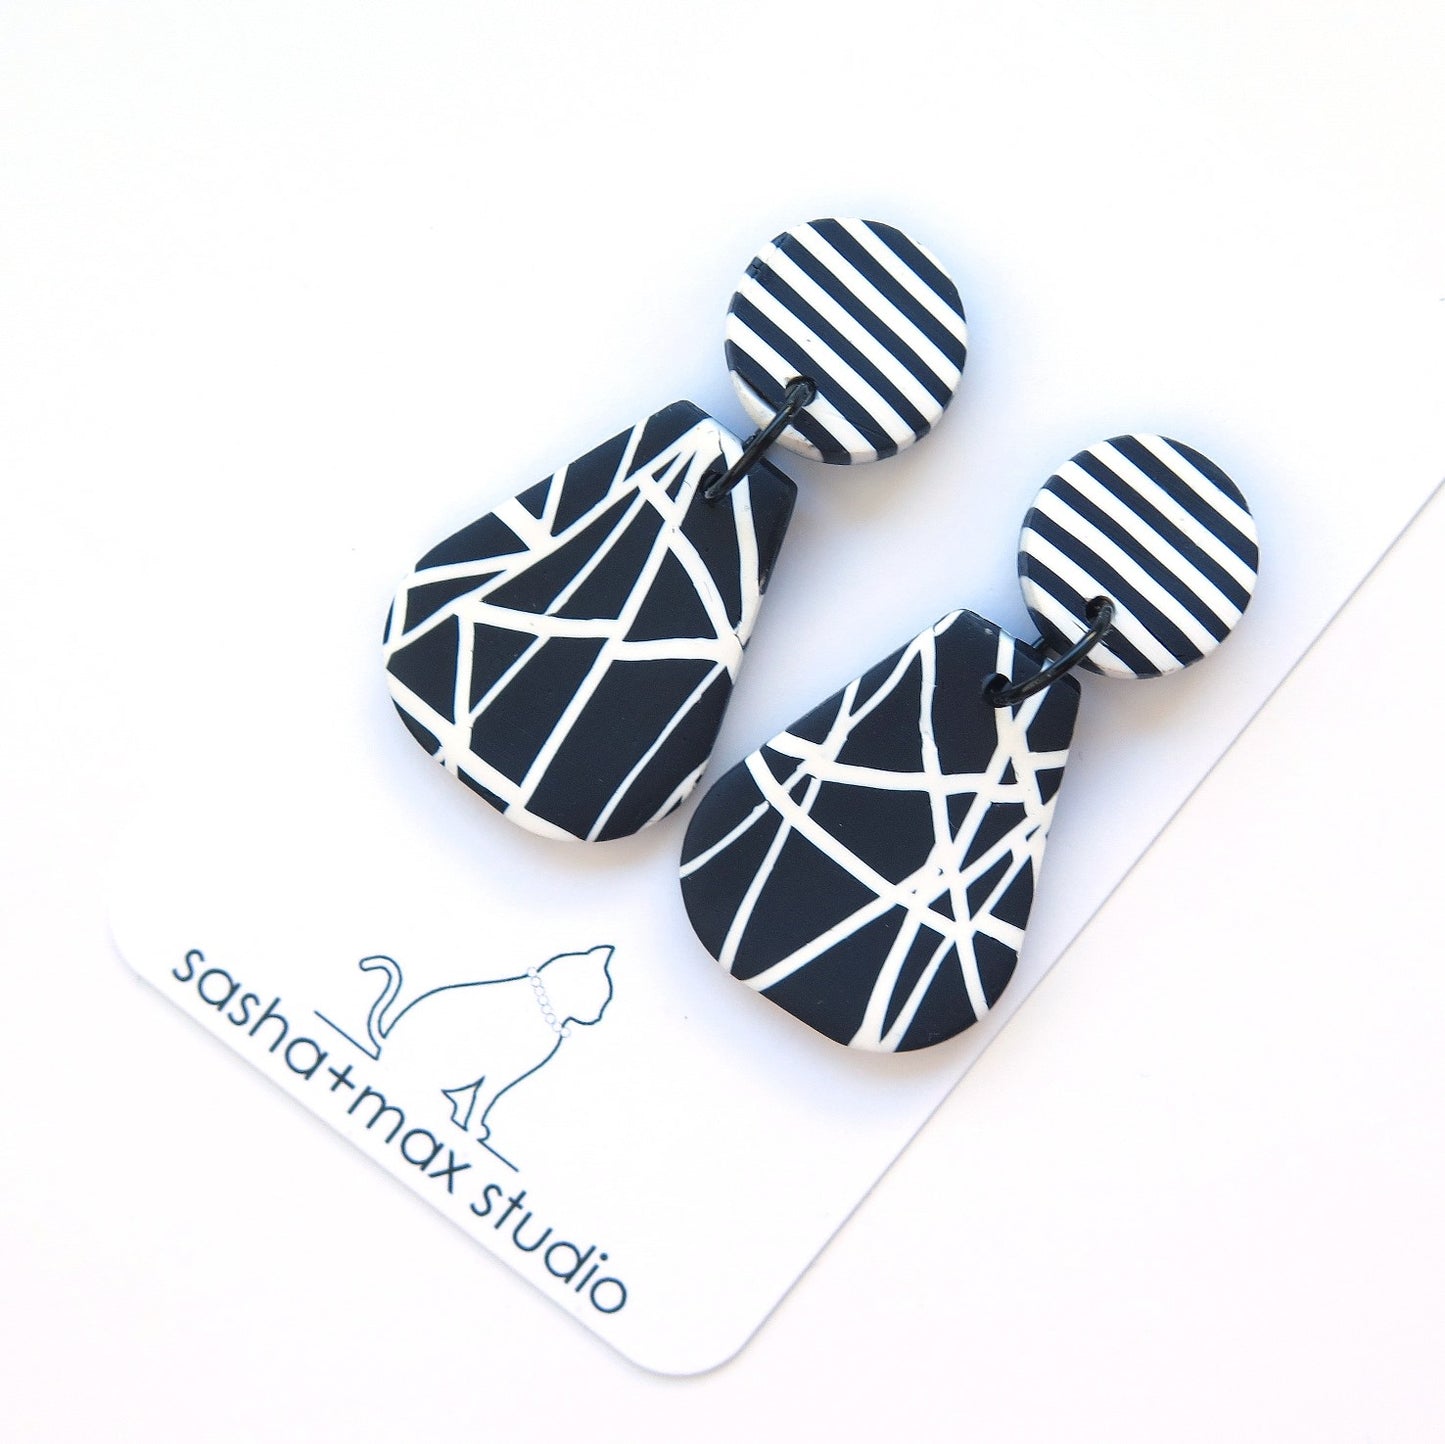 Abstract black and white pear shape earrings